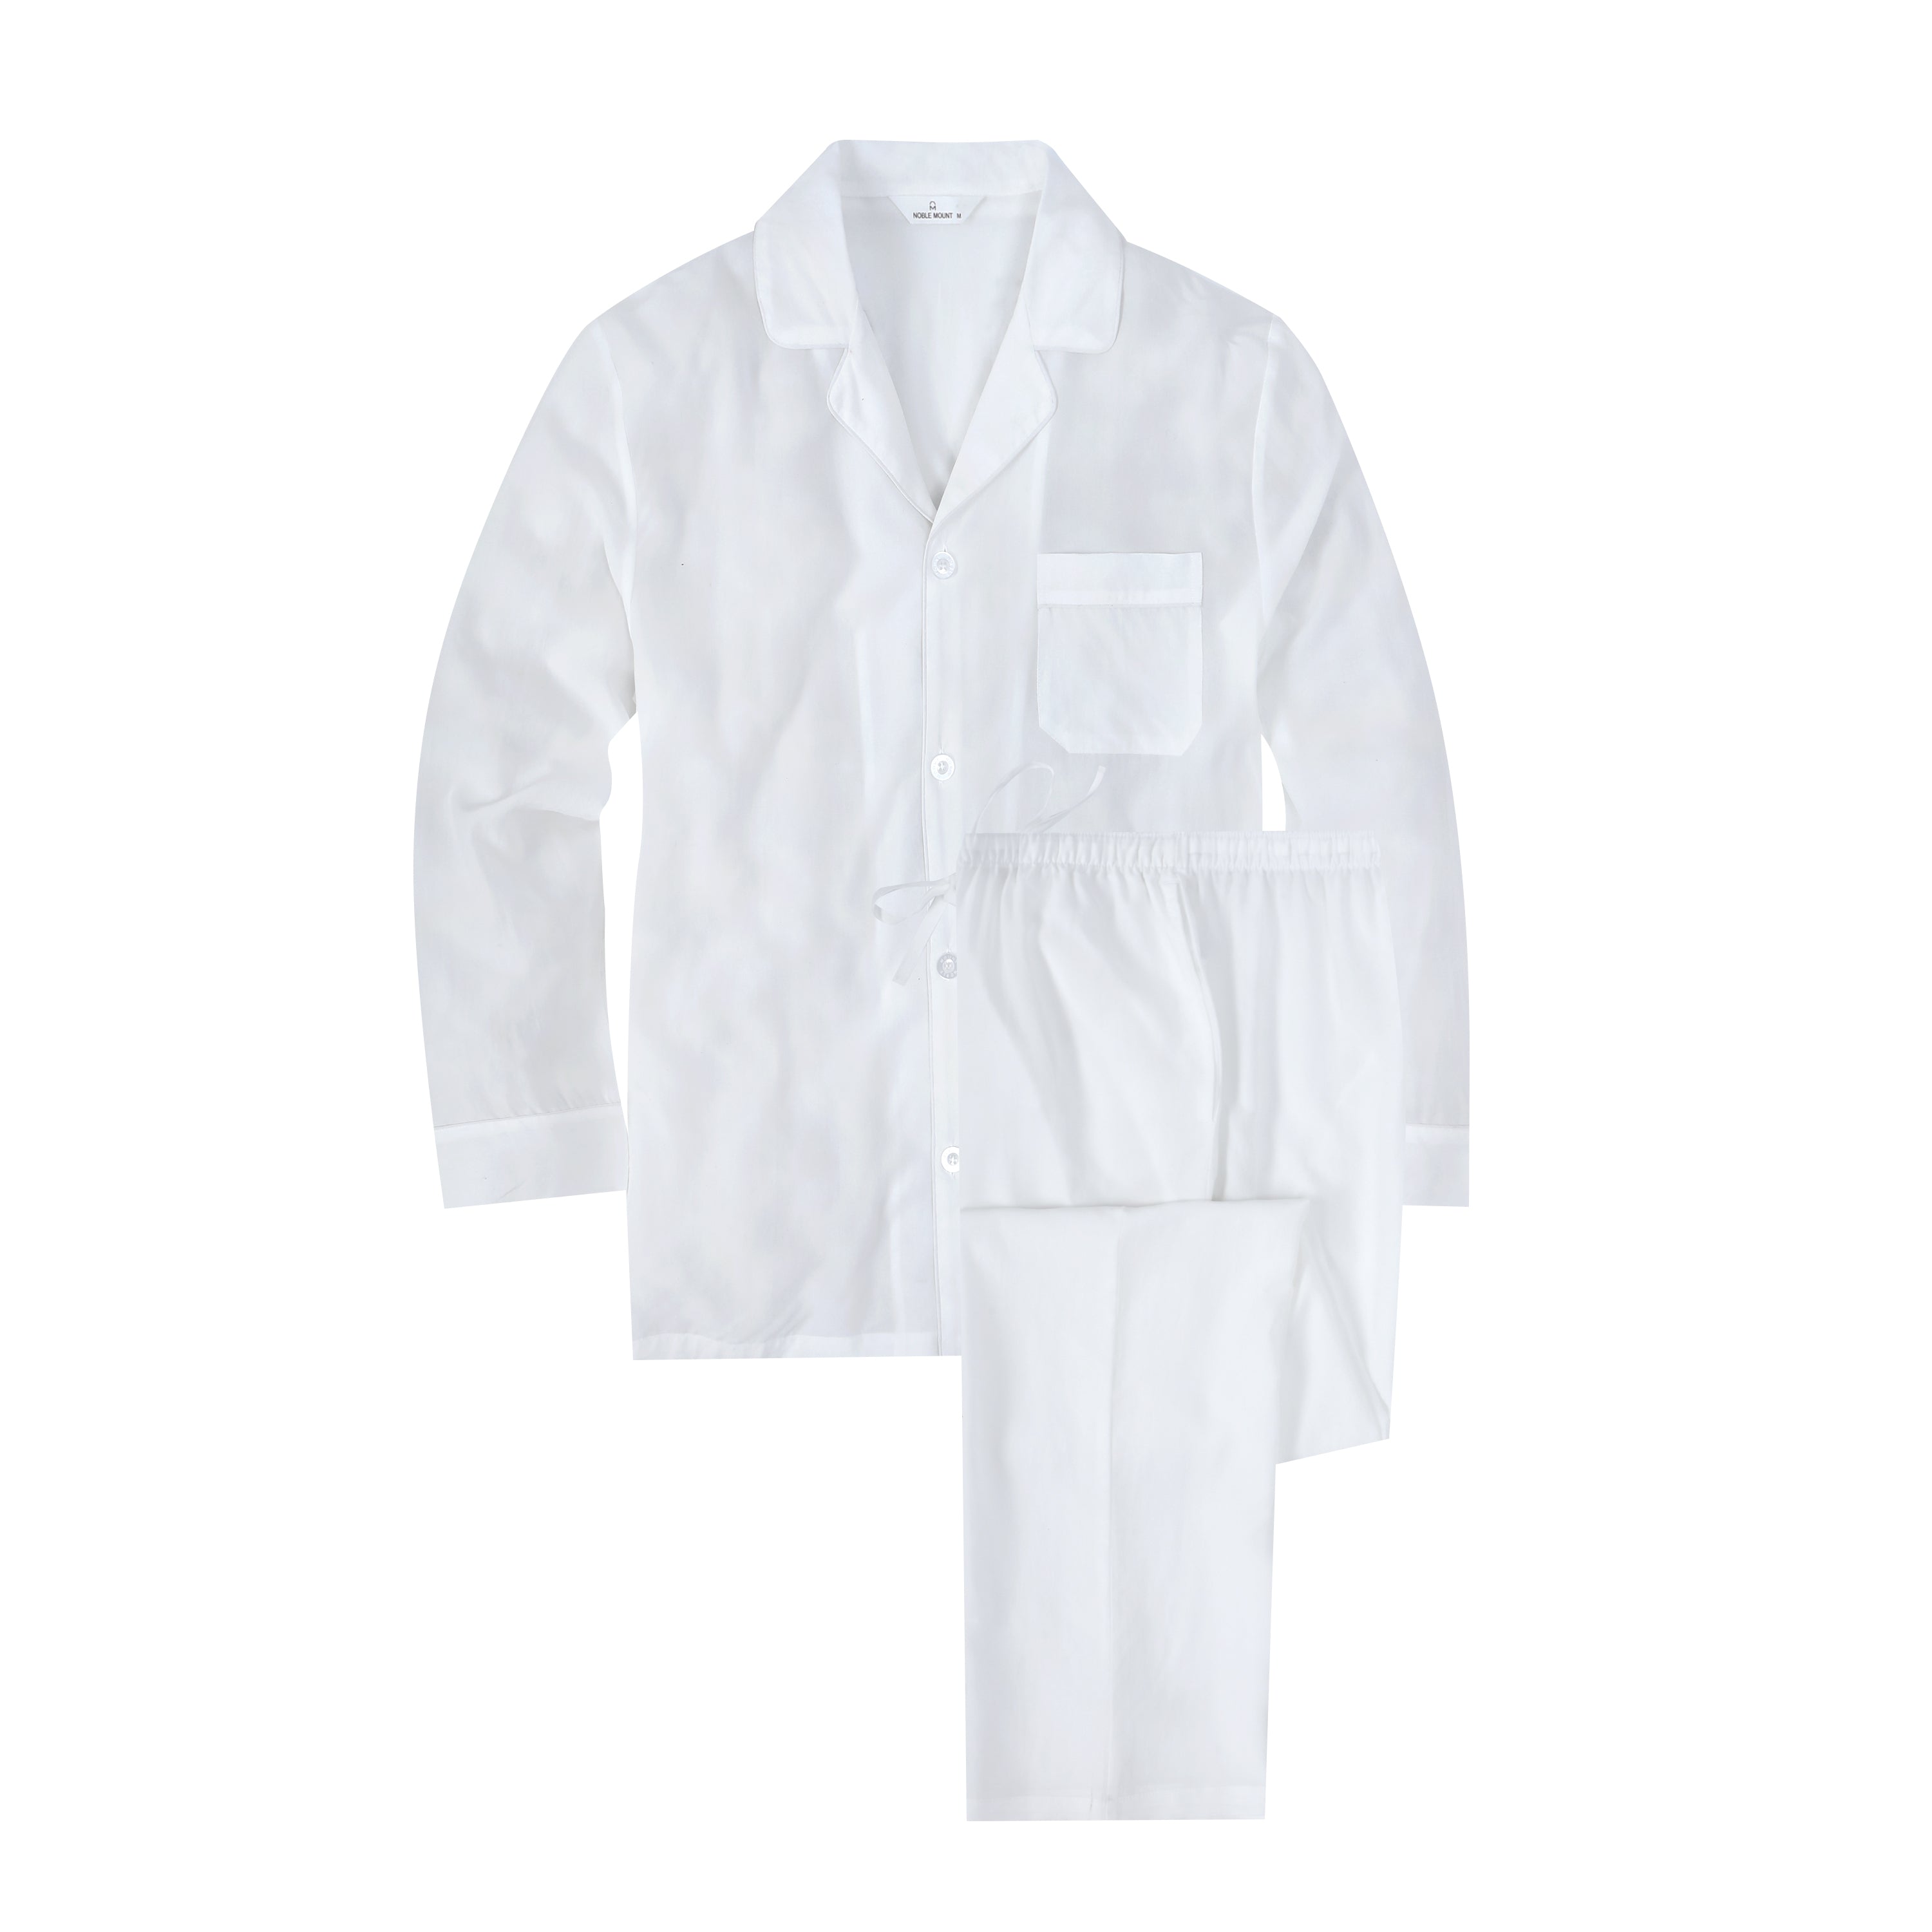 Mens 2-Piece Cooling Pajama Set made from Eucalyptus Tencel - Hypoallergenic and Eco-Friendly Fabric